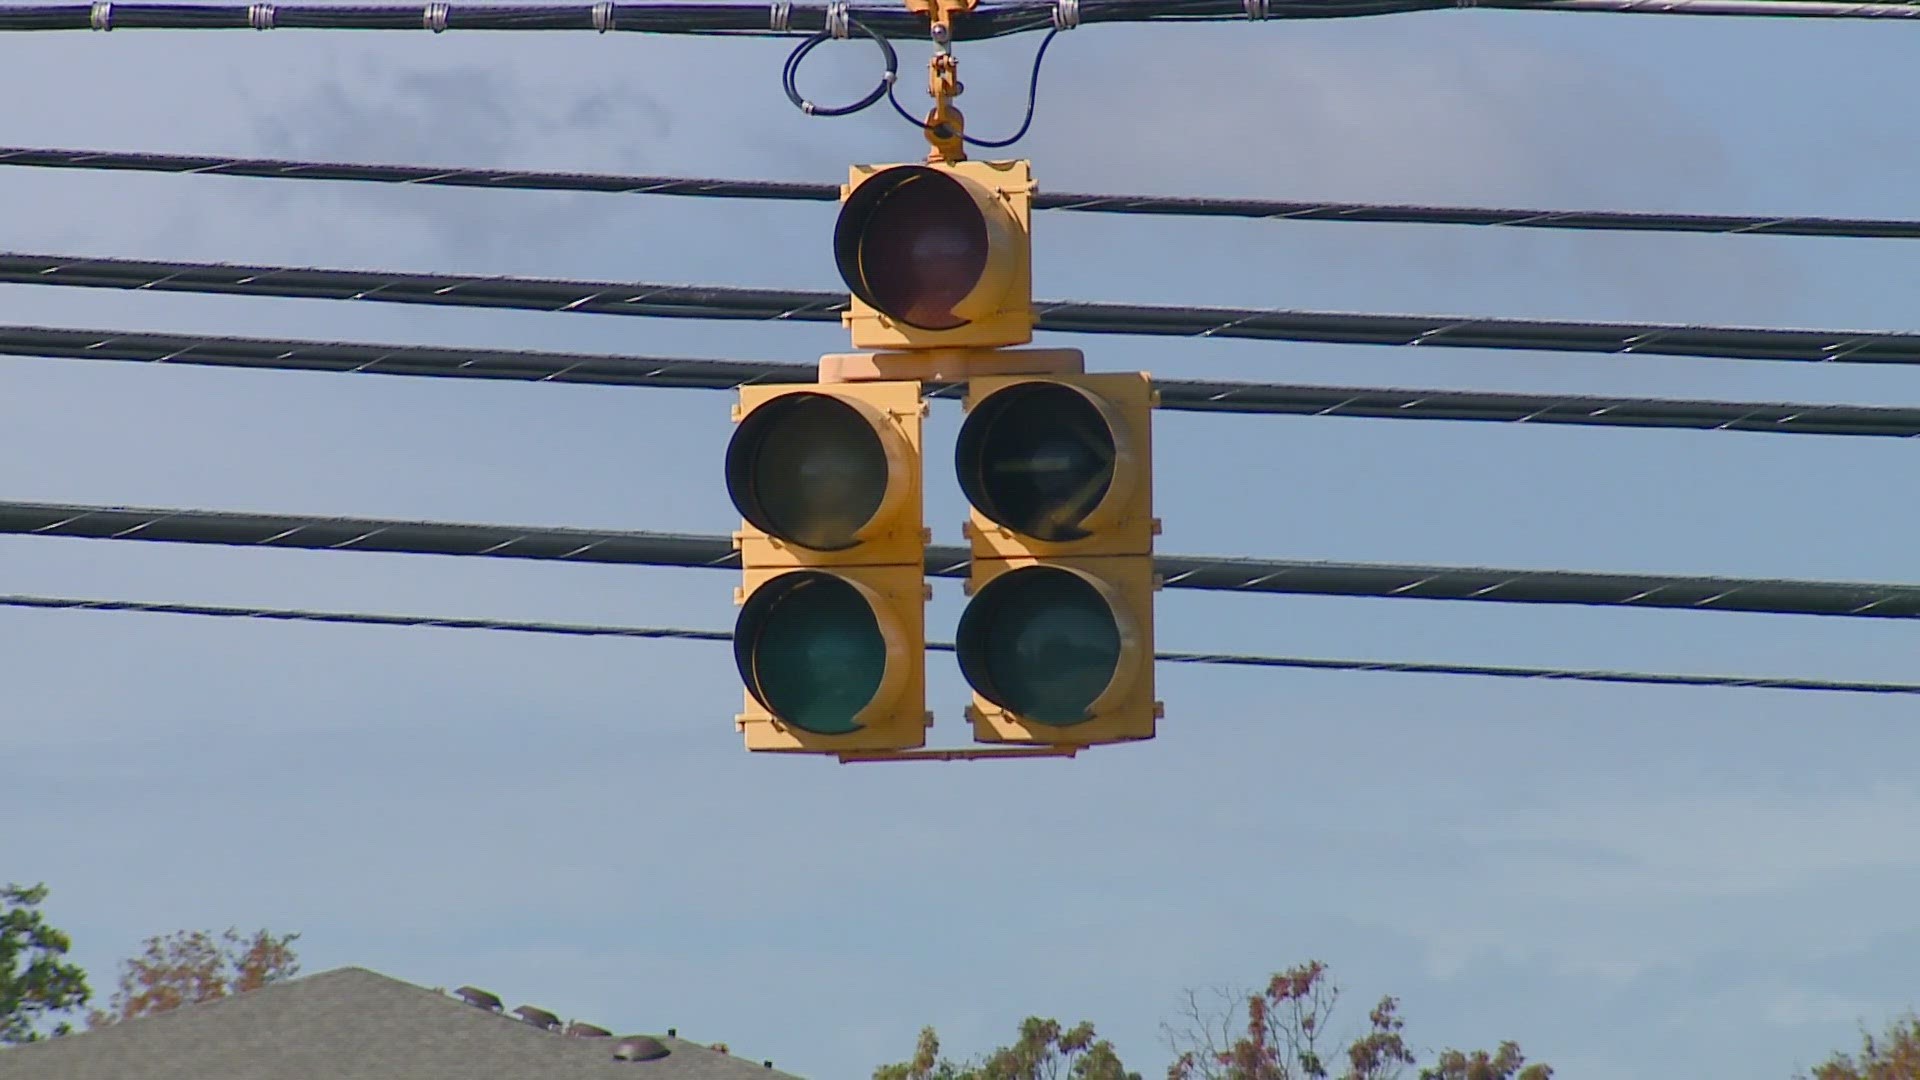 What to do at a stoplight if the power goes out, News